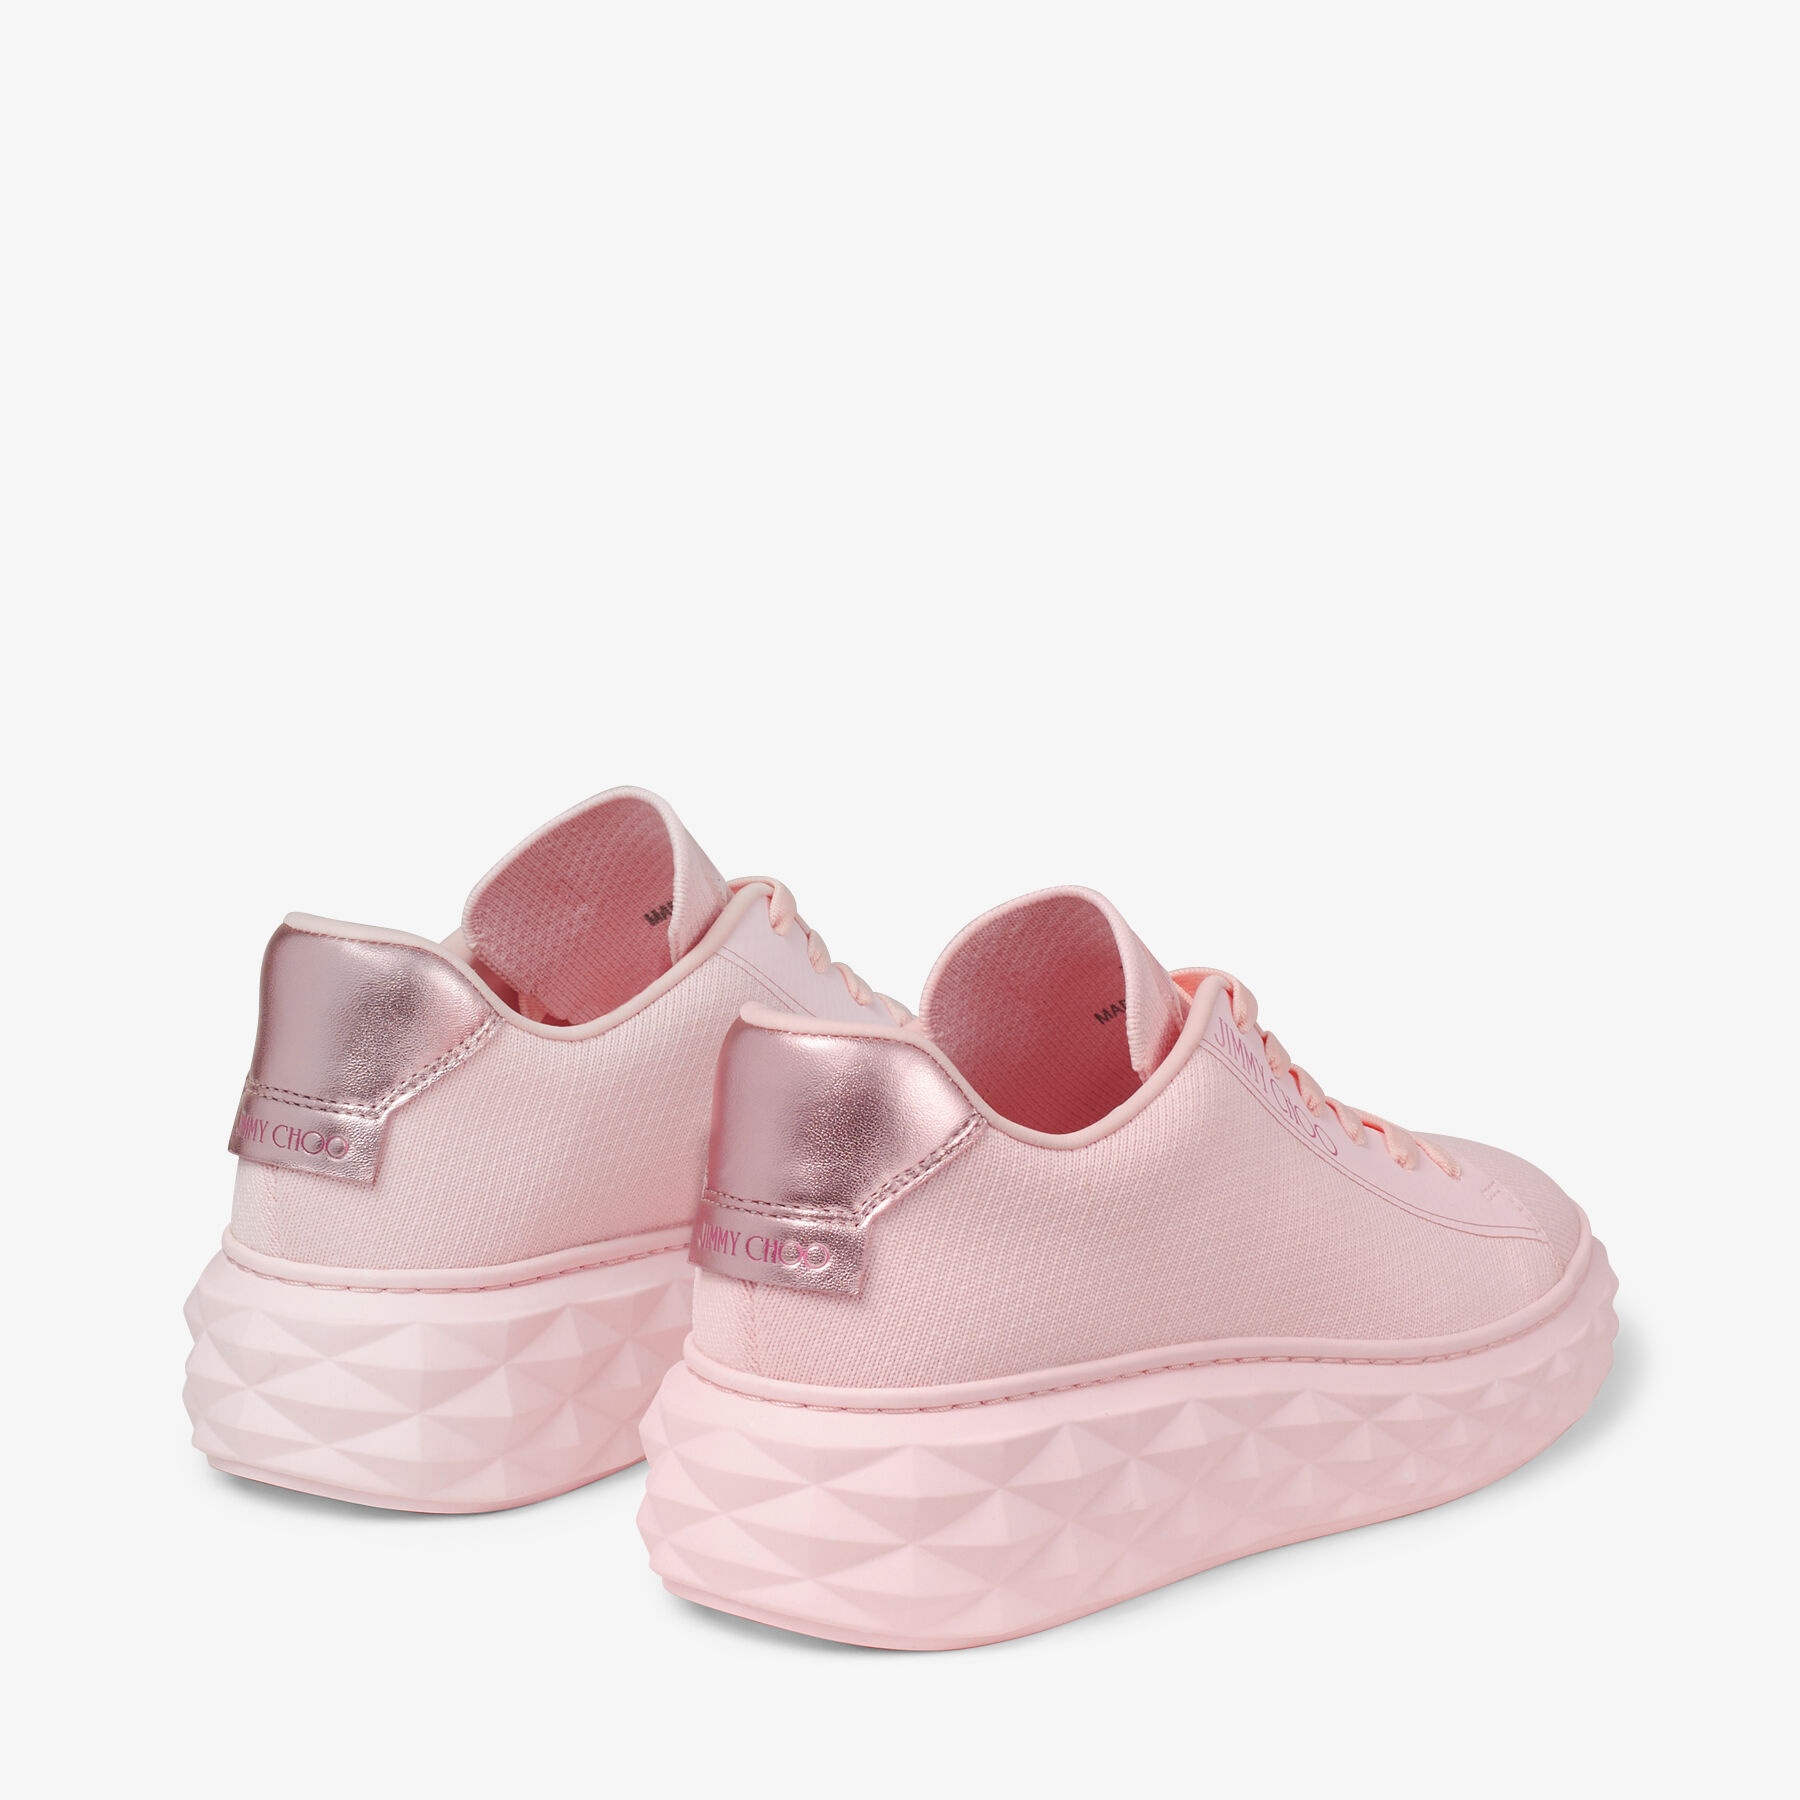 Diamond Light Maxi/f
Powder Pink Knit Low-Top Trainers with Platform Sole - 7